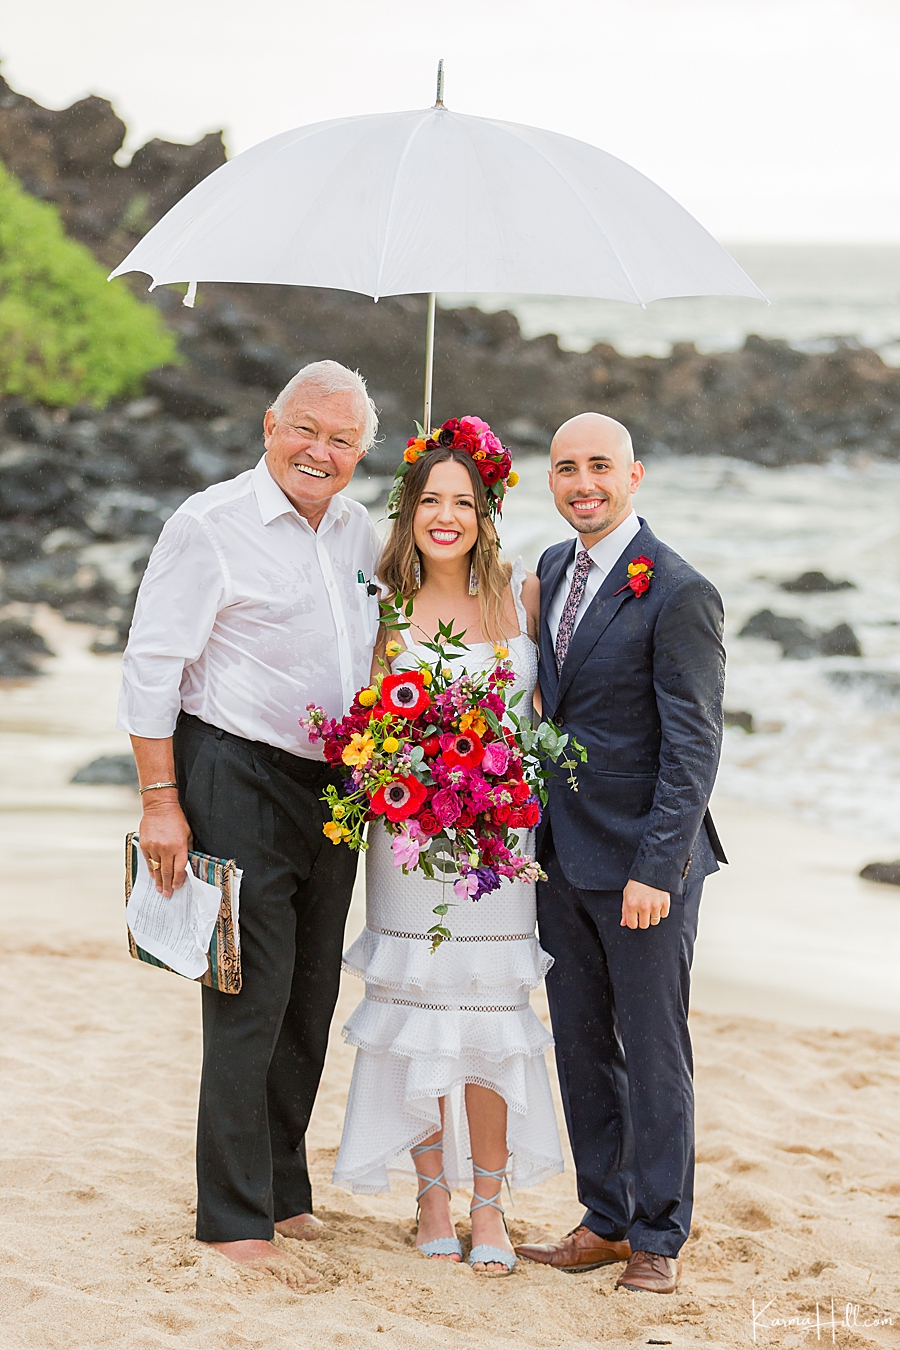 bride and groom pose with minister under umbrella on a rainy beach wedding 